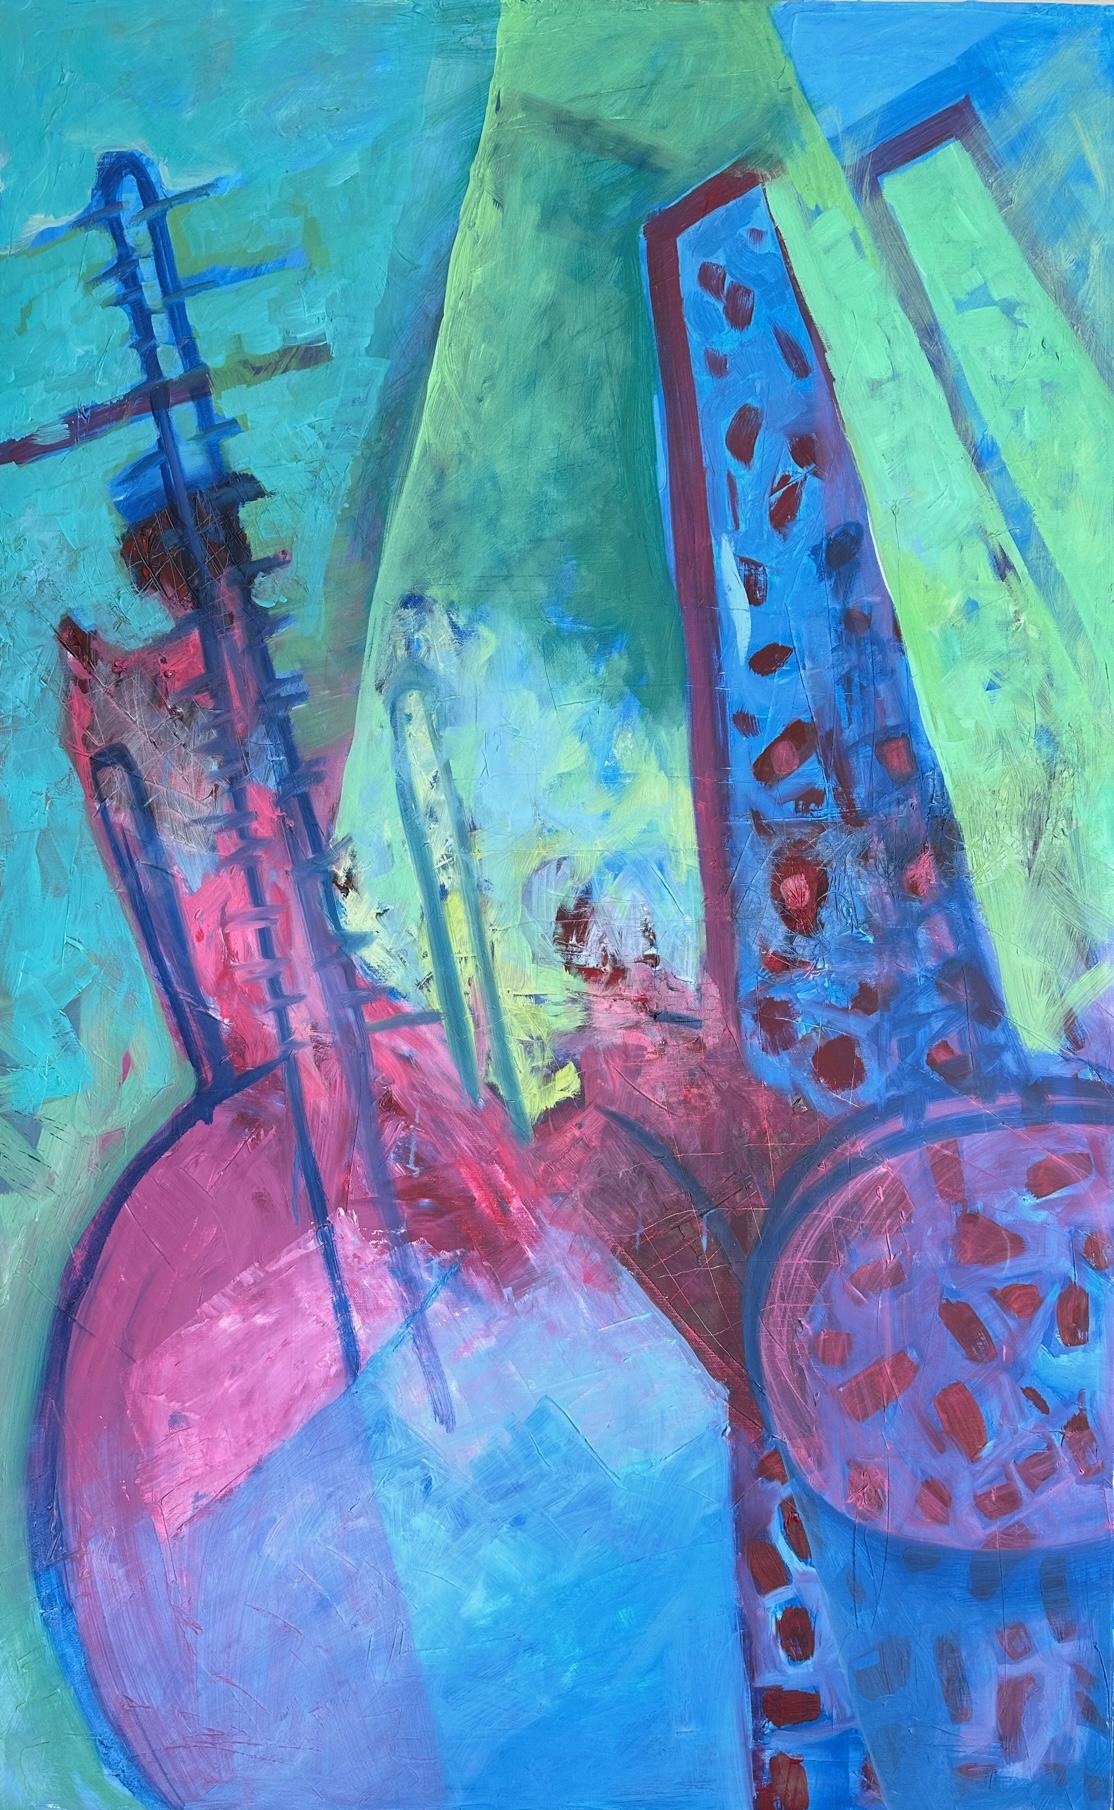 Oya Bolgun is a visionary artist whose dynamic and ever-evolving abstract style captures the imagination and inspires the senses. Drawing on her deep passion for self-expression and her desire to connect with her audience, Oya creates works that are